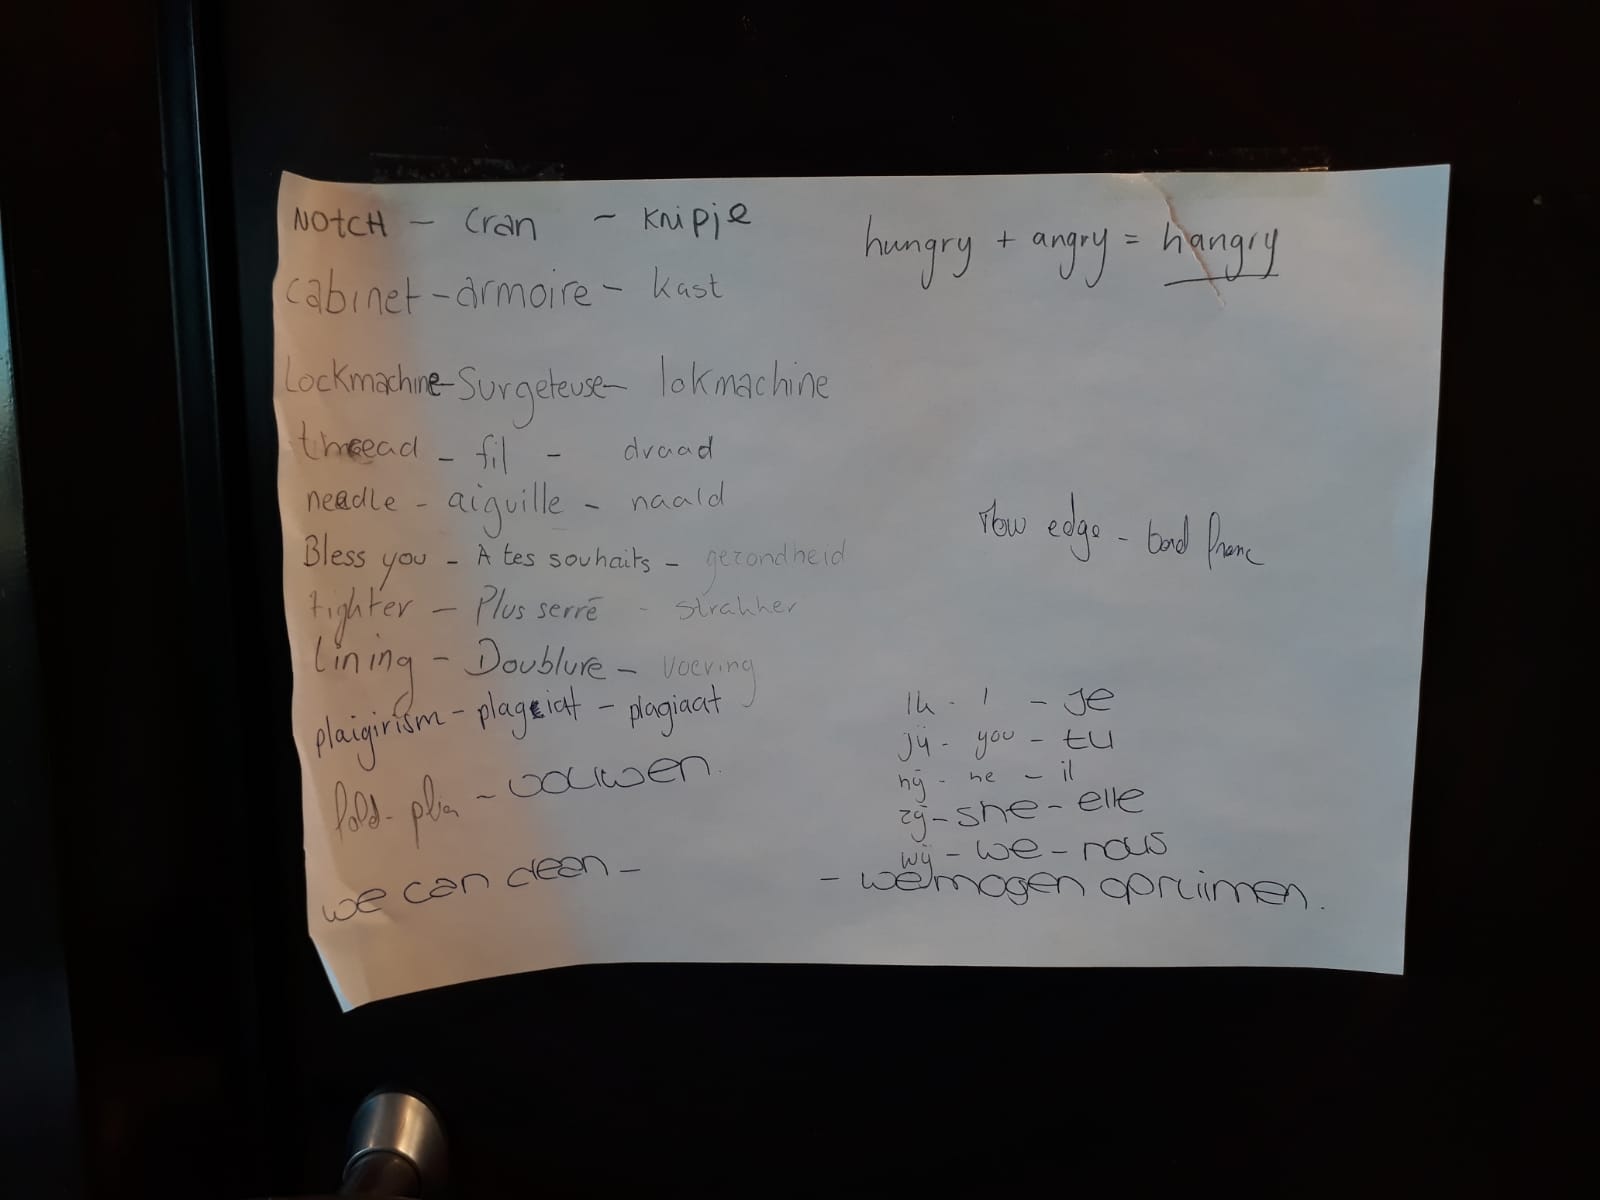 This picture shows a piece of paper that was taped to a cabinet in Bas Kosters' studio. On the one side it has a row of words in English, French and Dutch (example: cabinet, armoire, kast), on the top right corner it says: "hungry + angry = hangry". 